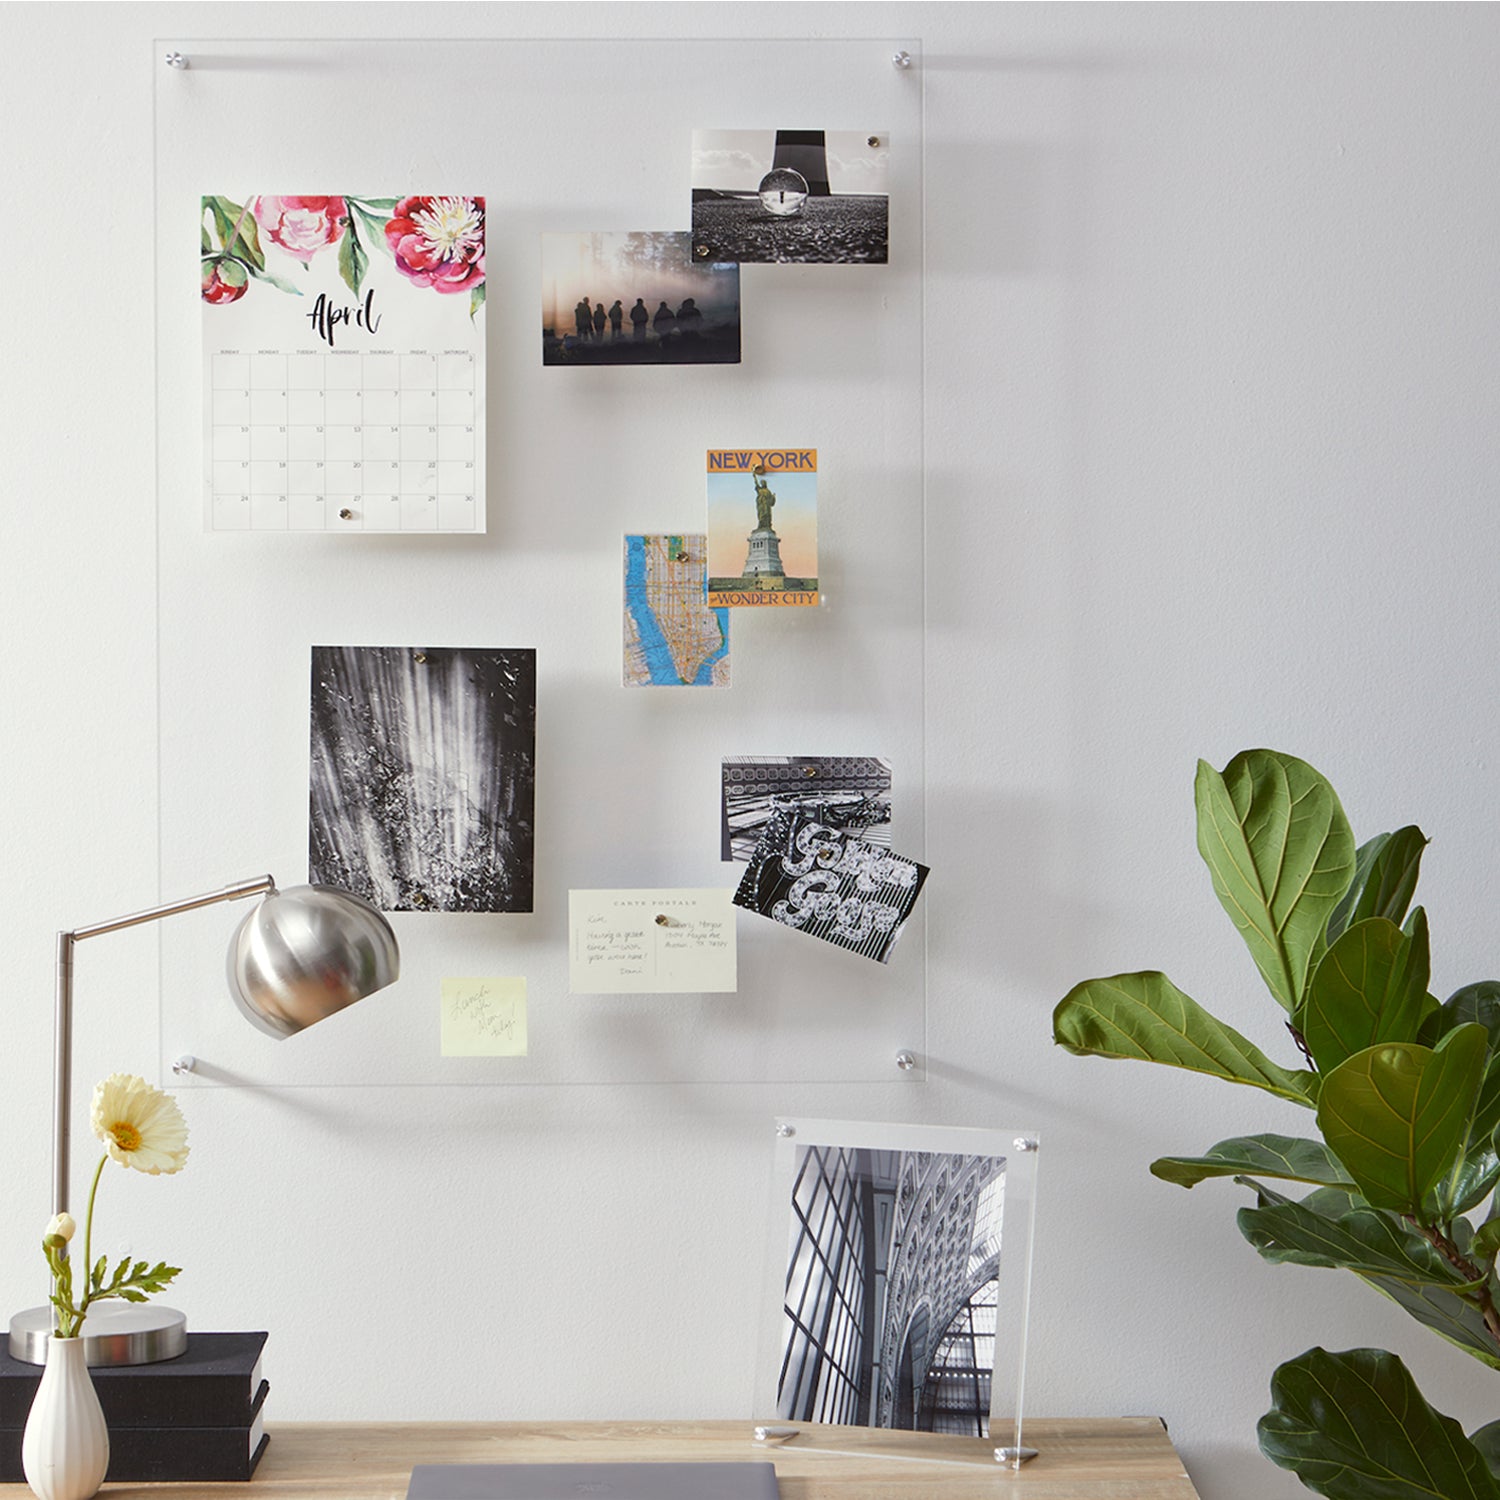 How to Hang Tabletop Photo Frames on the Wall